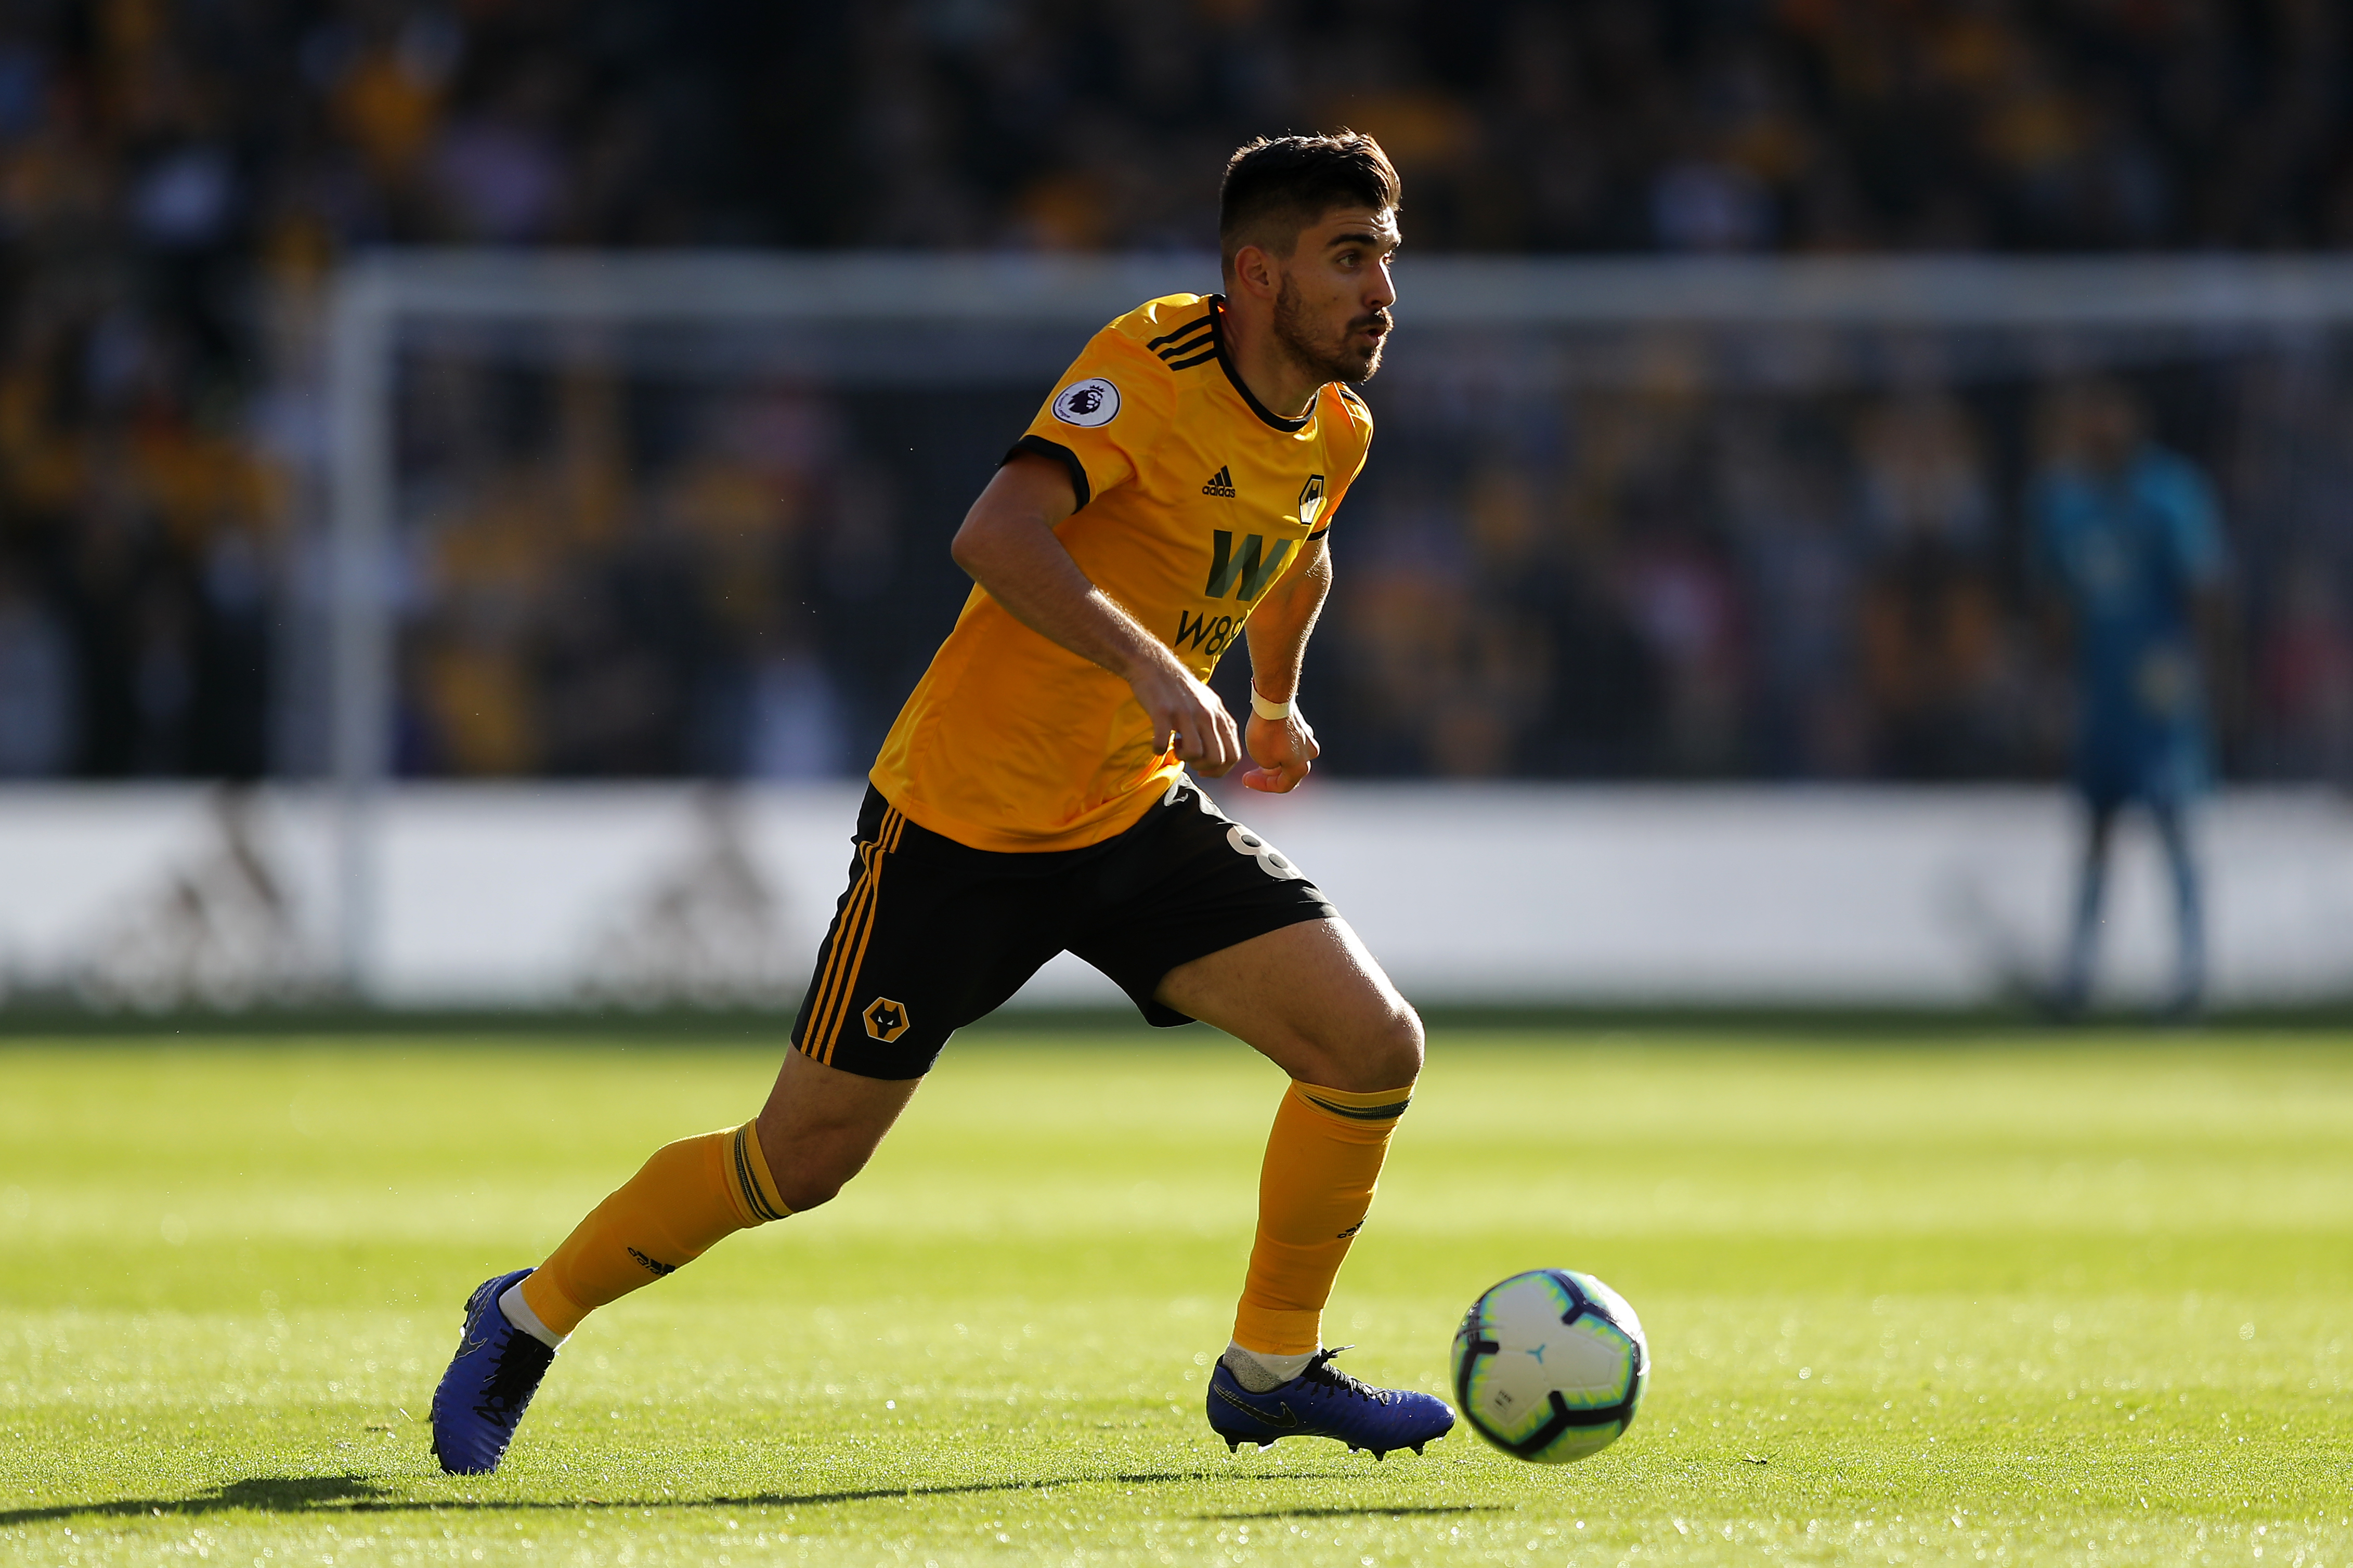 Ruben Neves unlikely stay at Wolves beyond this season. (Photo by Richard Heathcote/Getty Images)